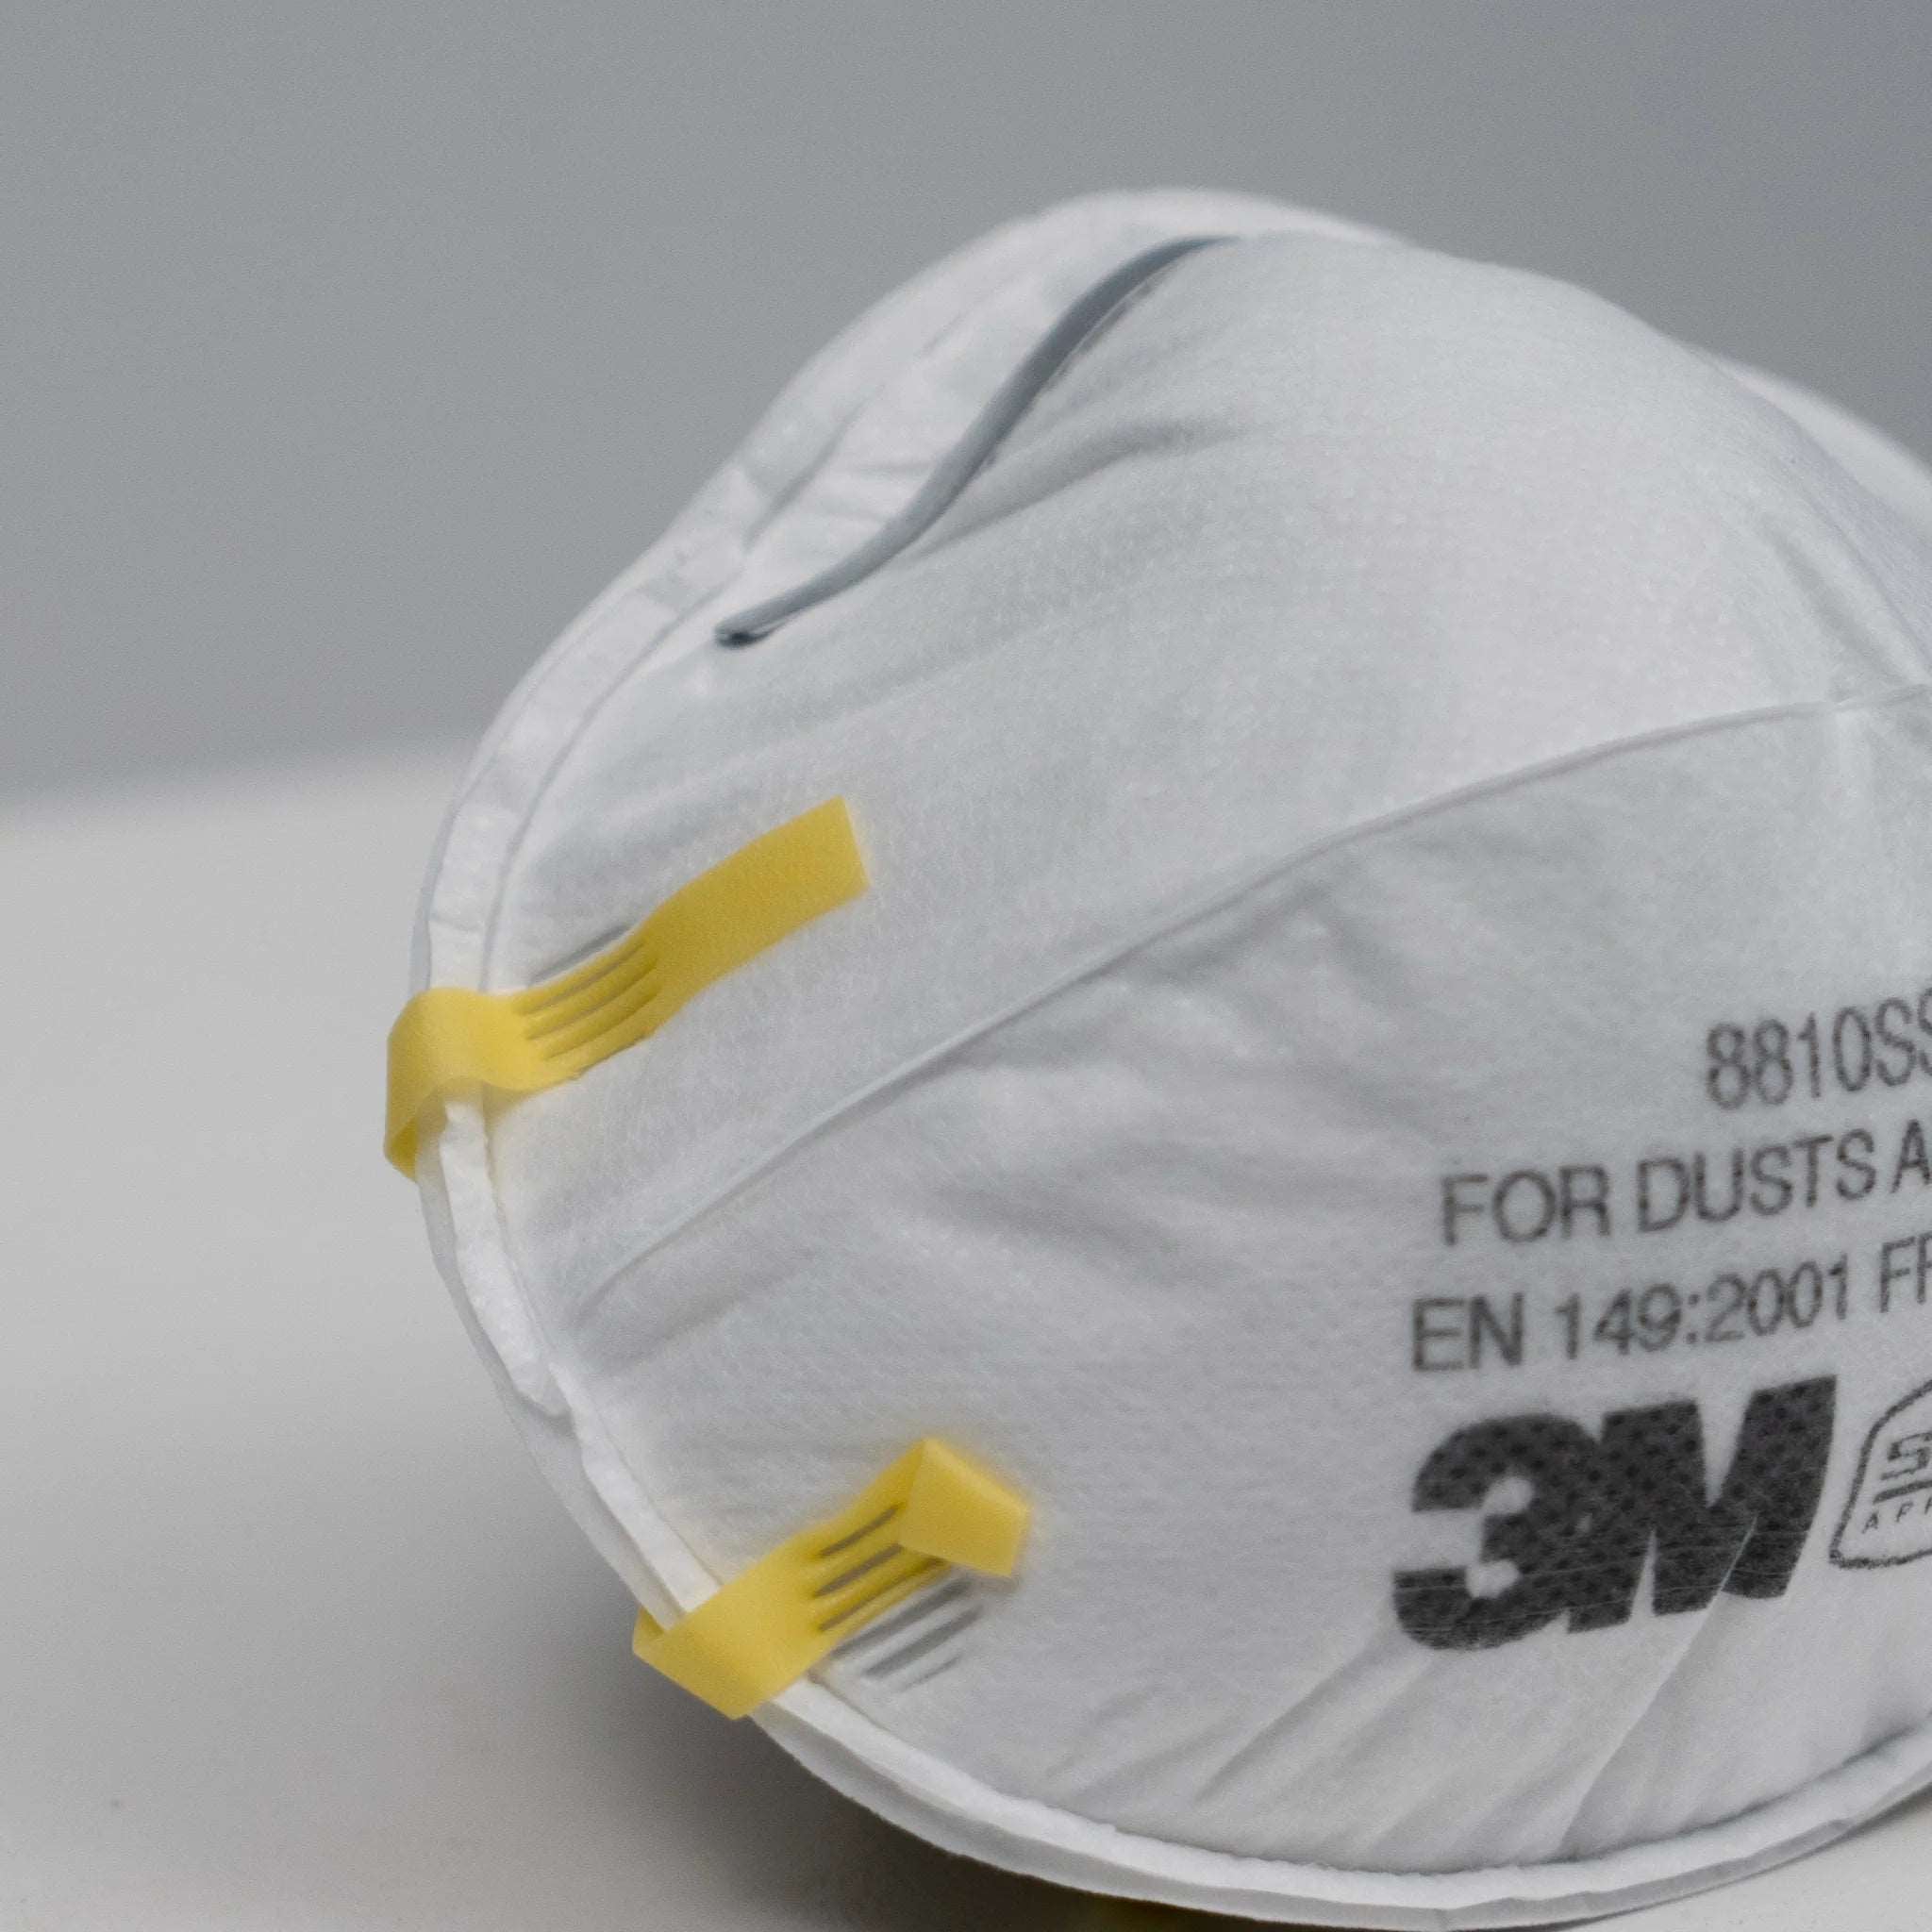 3M Disposable Respirator Mask 8810 Power Tool Services